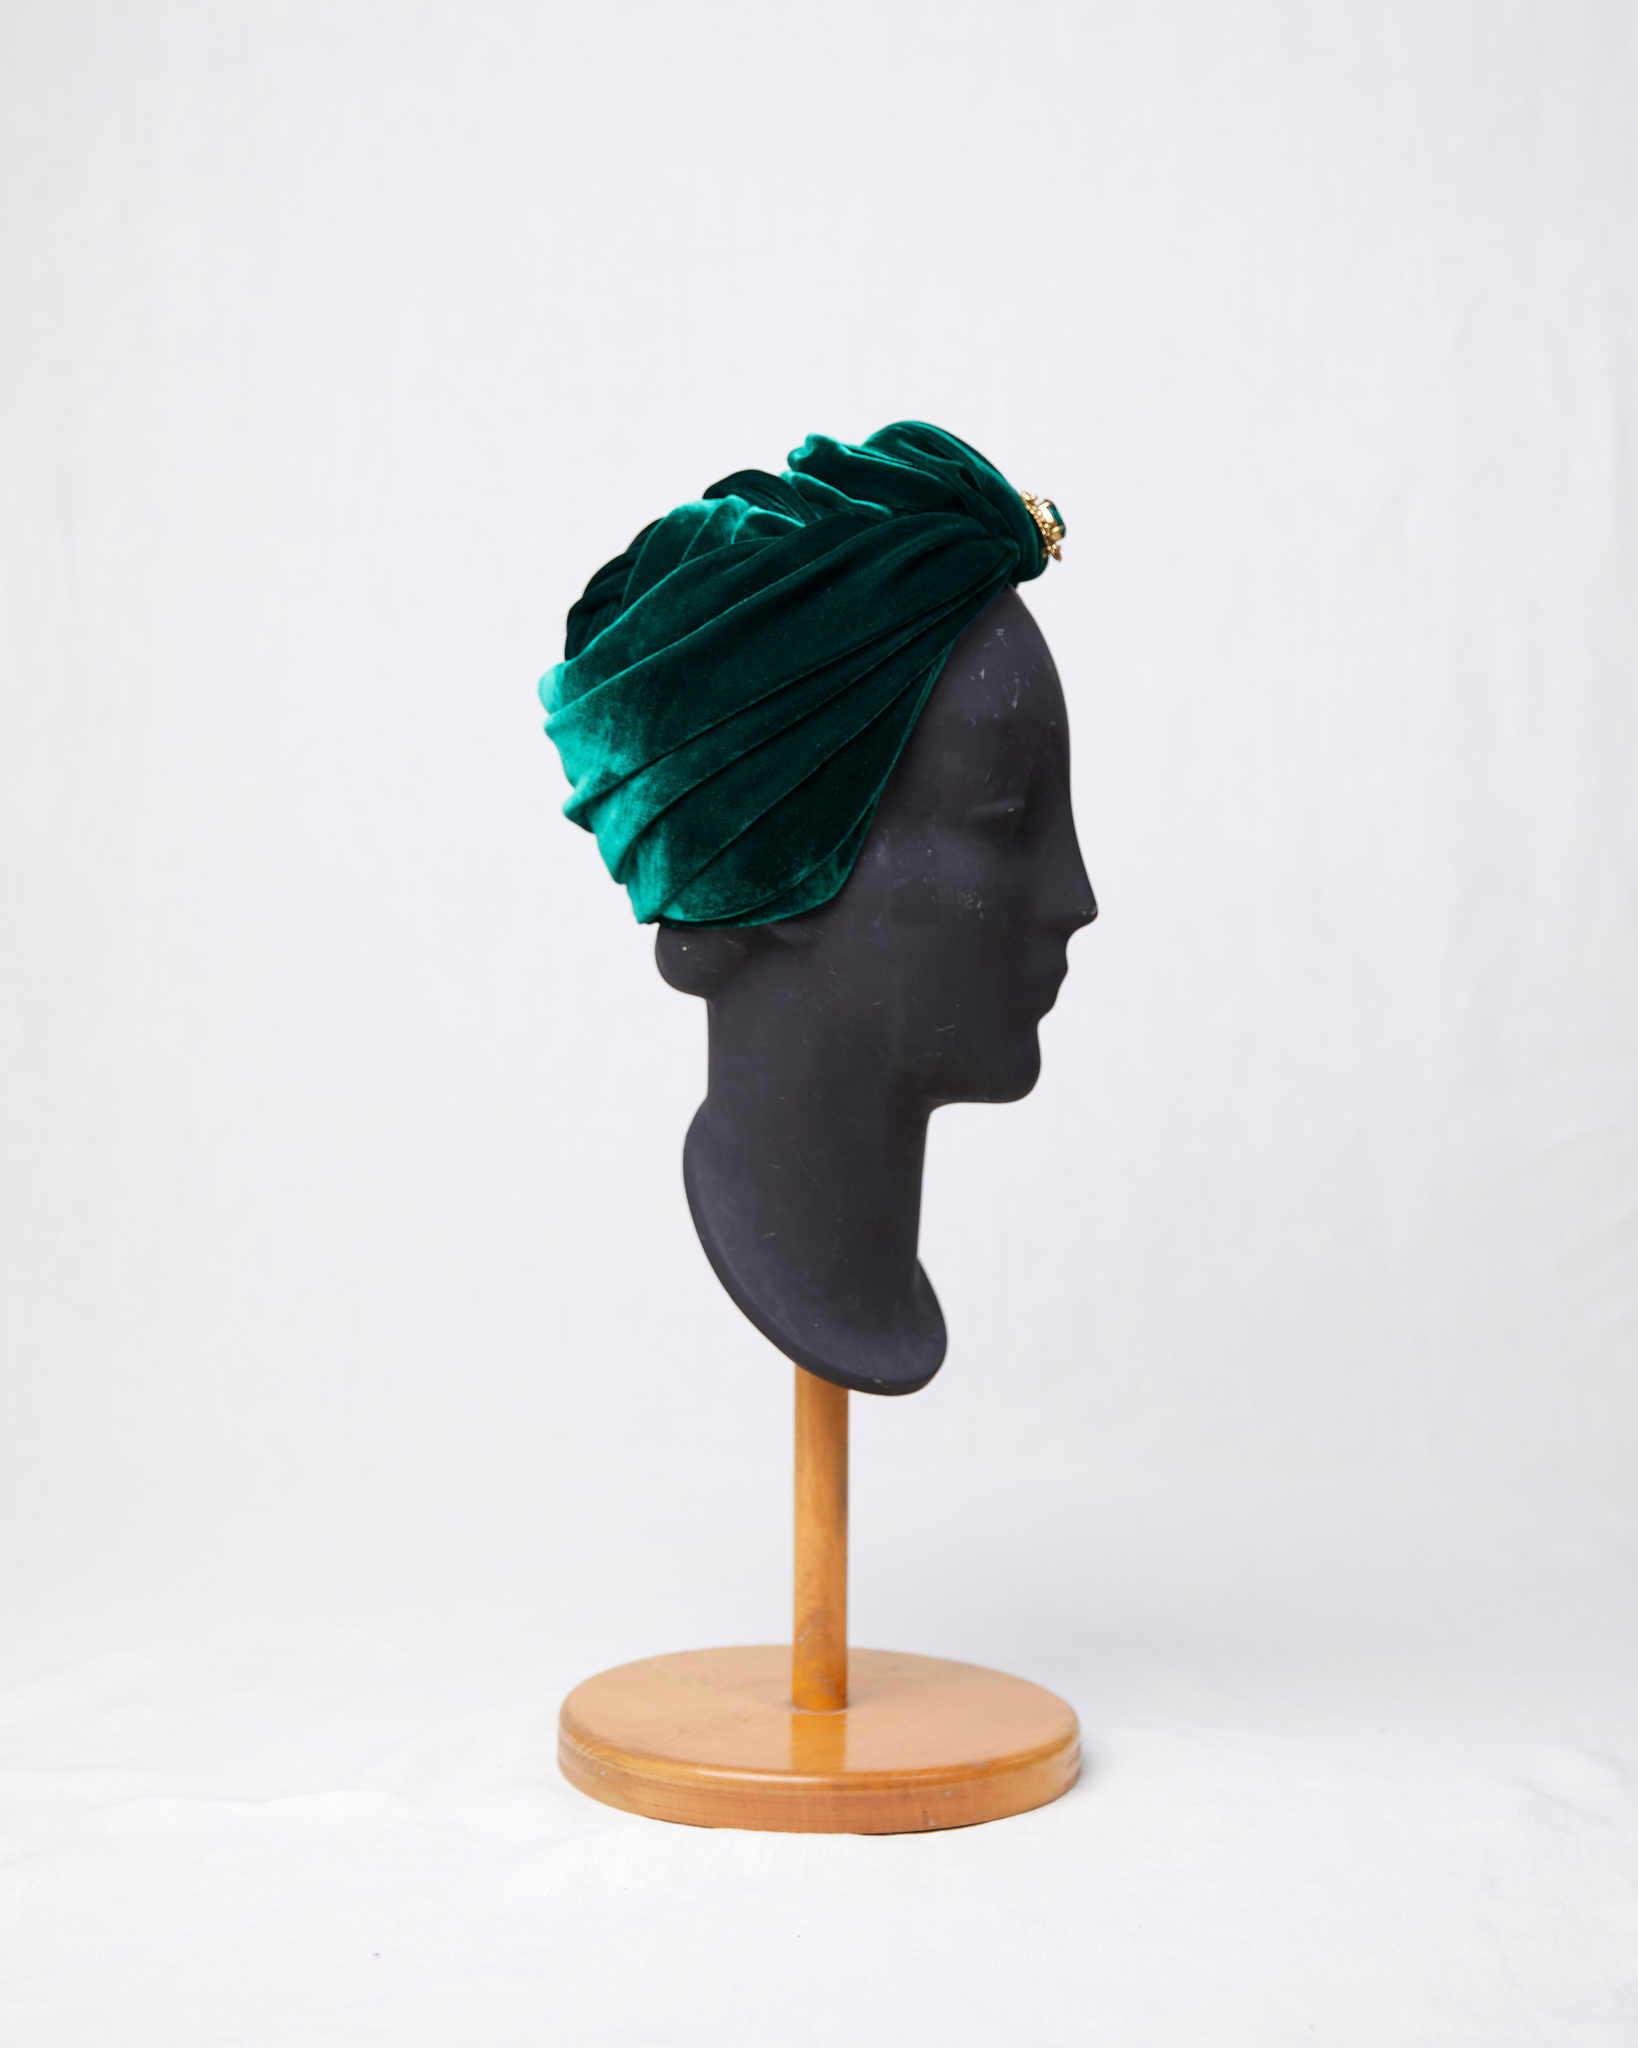 HEADQUARTER | couture headwear Haute couture turban, made of silk velvet, trimmed with antique brooch. Unique piece. Designed and handcrafted in Switzerland.